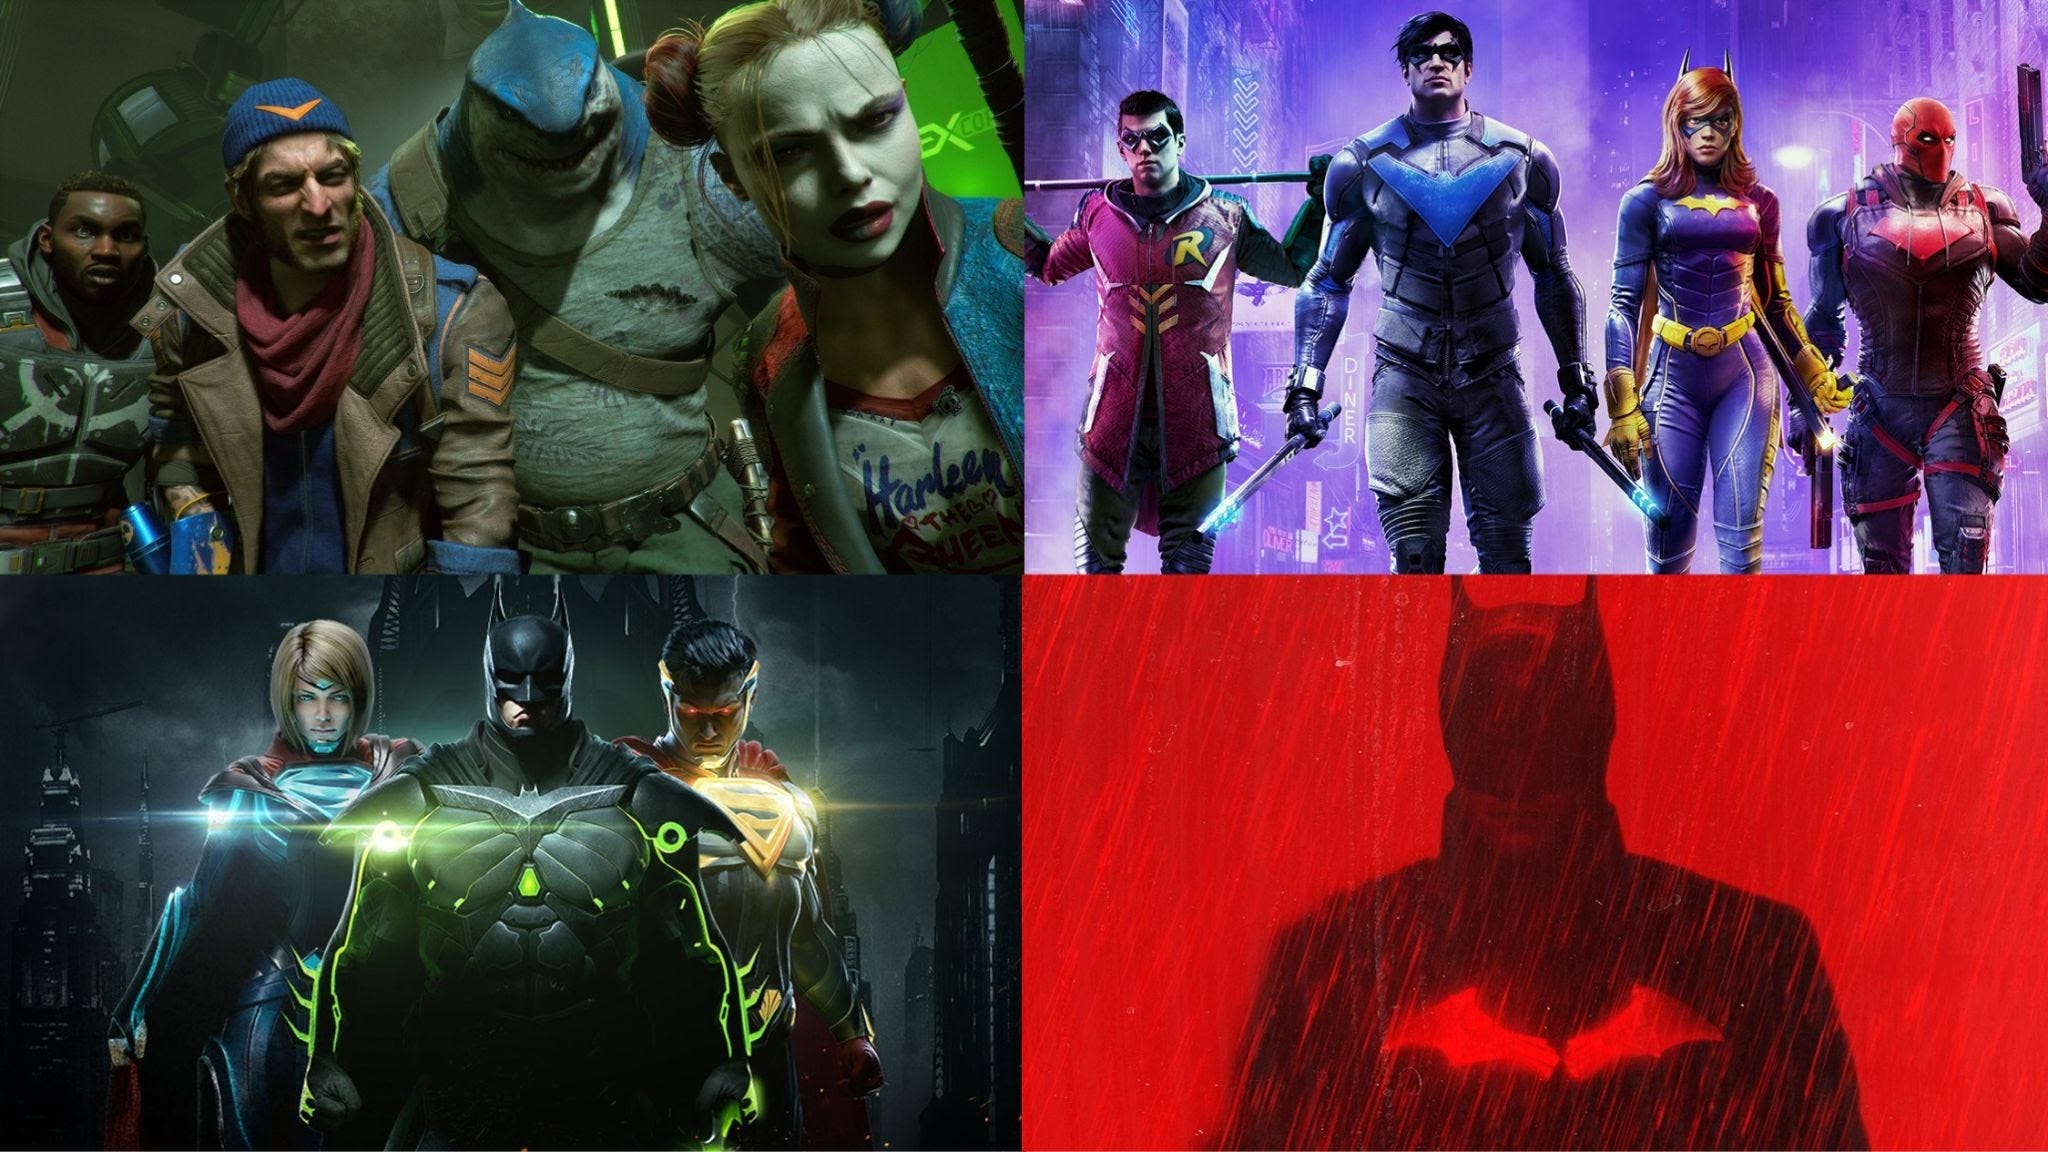 DC FanDome 2021 Recap: Gotham Knights Story Trailer and Commentary